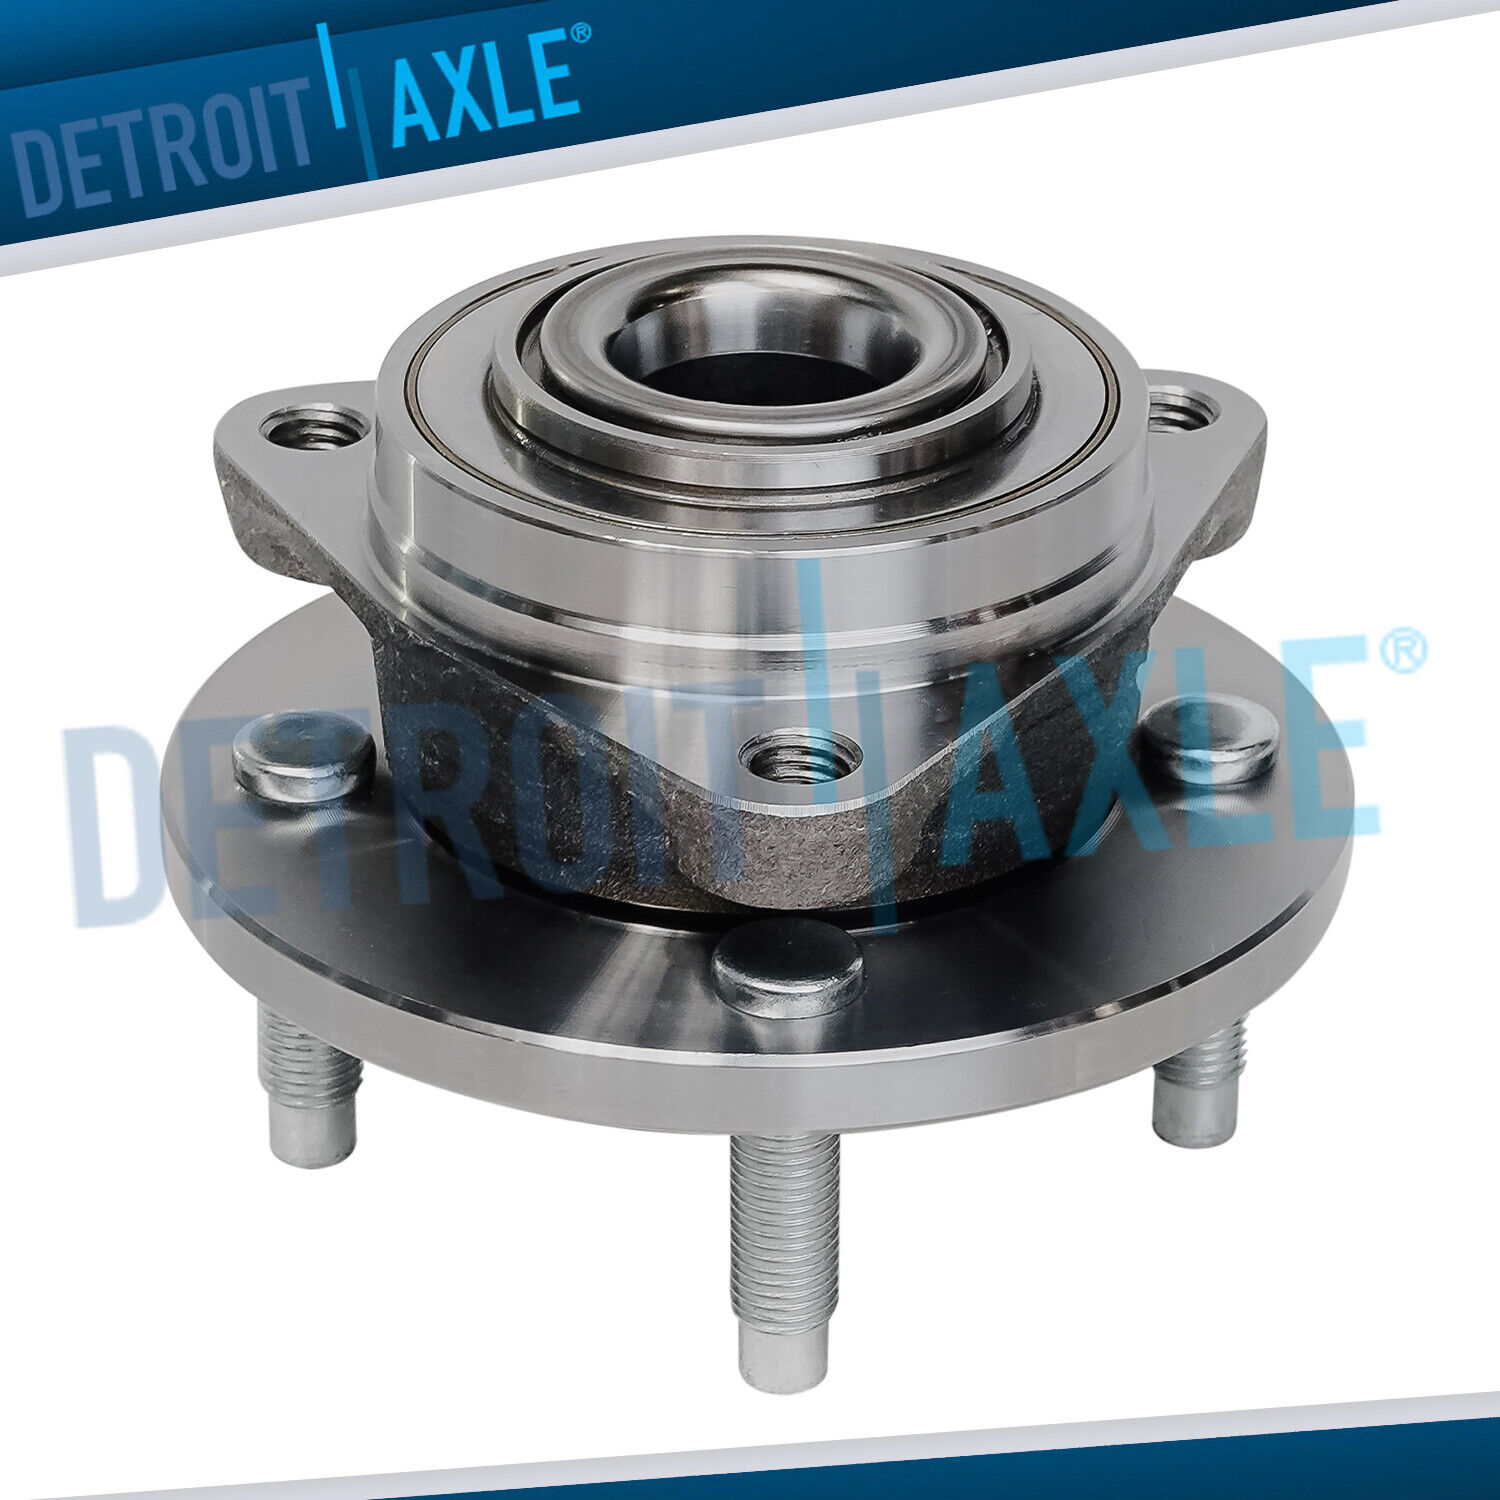 Front Wheel Hub and Bearing for Chevrolet Cobalt Pontiac G5 Saturn Ion NON-ABS